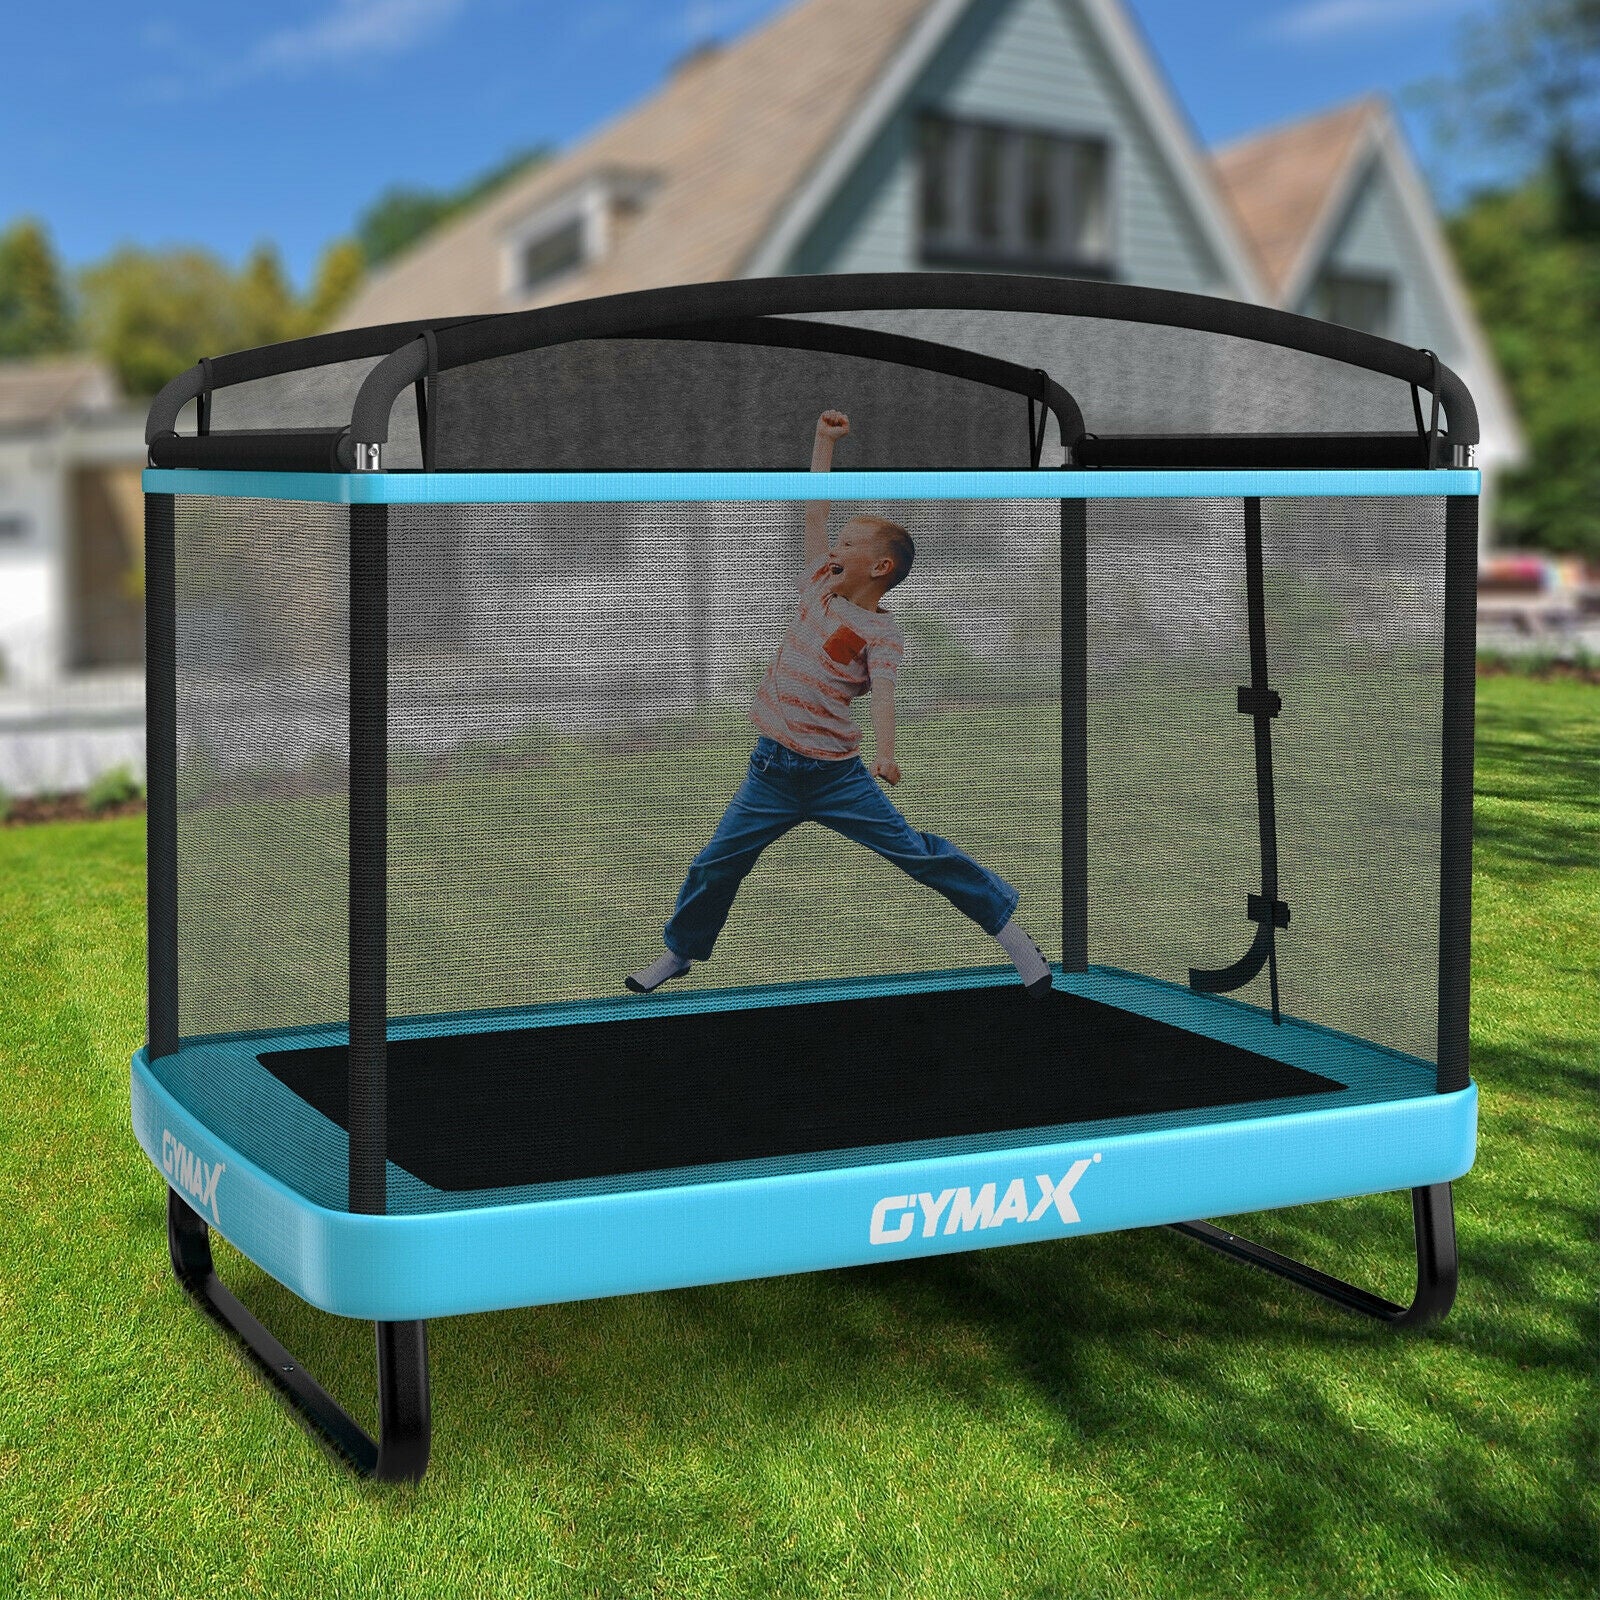 Thoughtful Design: The trampoline has an appropriate height from the ground (16") for easy access, and the zipper with double buckles allows your little one to enter and exit conveniently. The enclosure net adds an extra layer of safety, providing peace of mind while your child has fun.